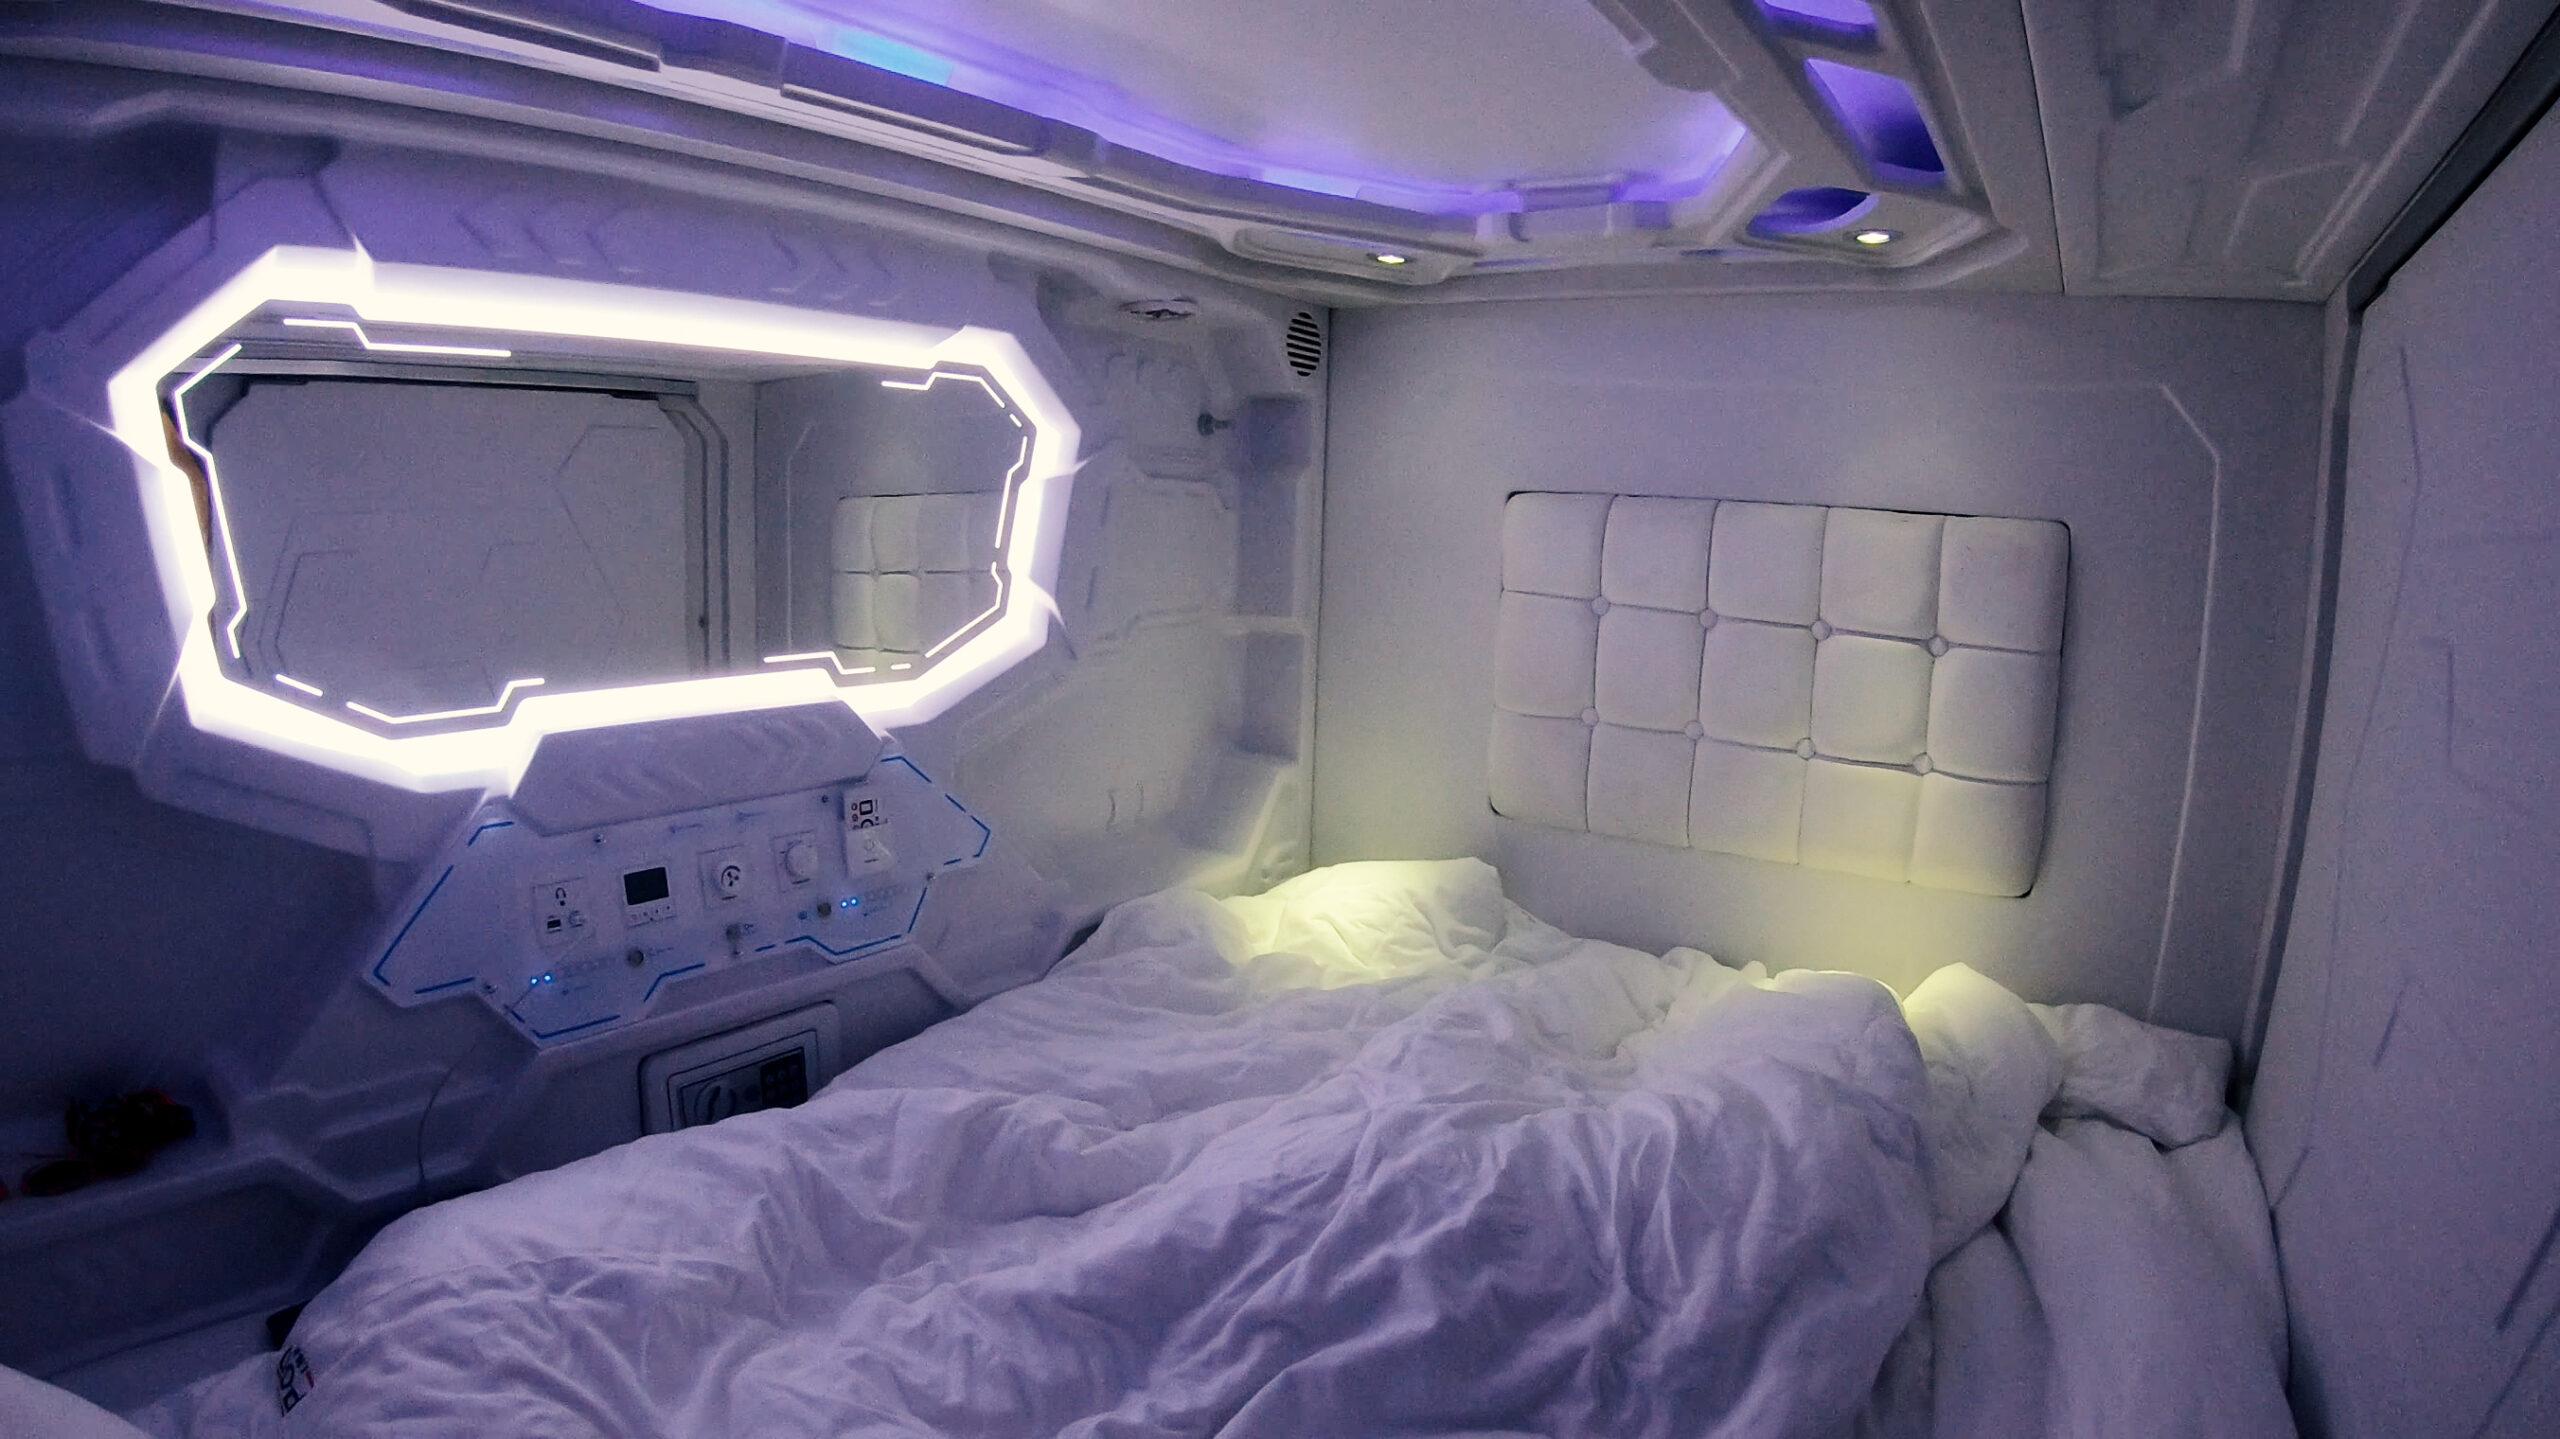 A sleeping capsule from the inside